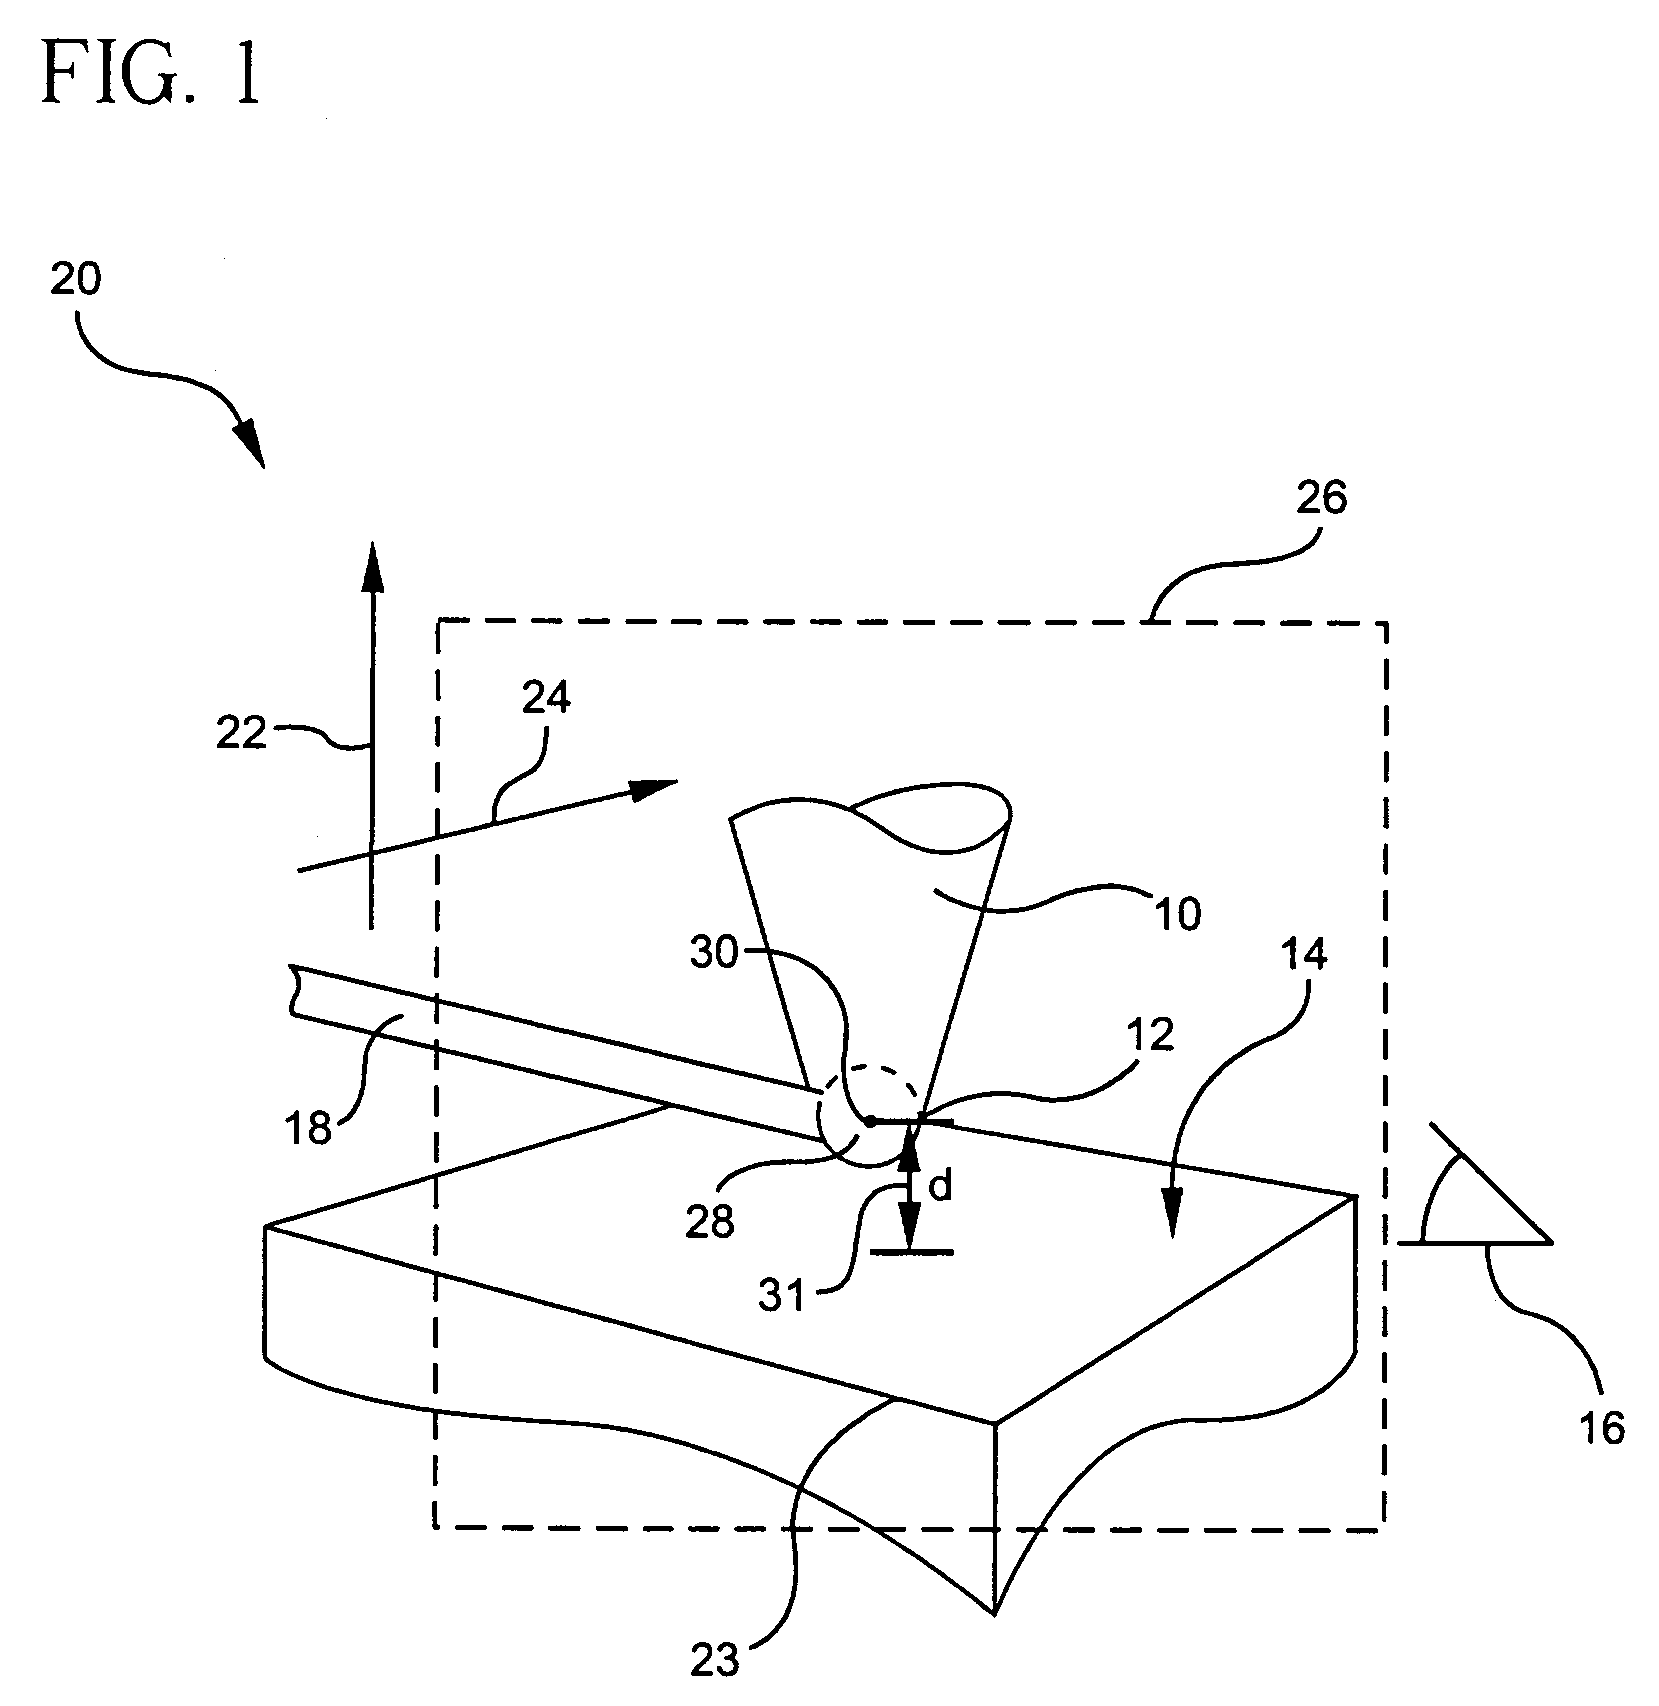 Method and apparatus for high resolution nuclear magnetic resonance imaging and spectroscopy